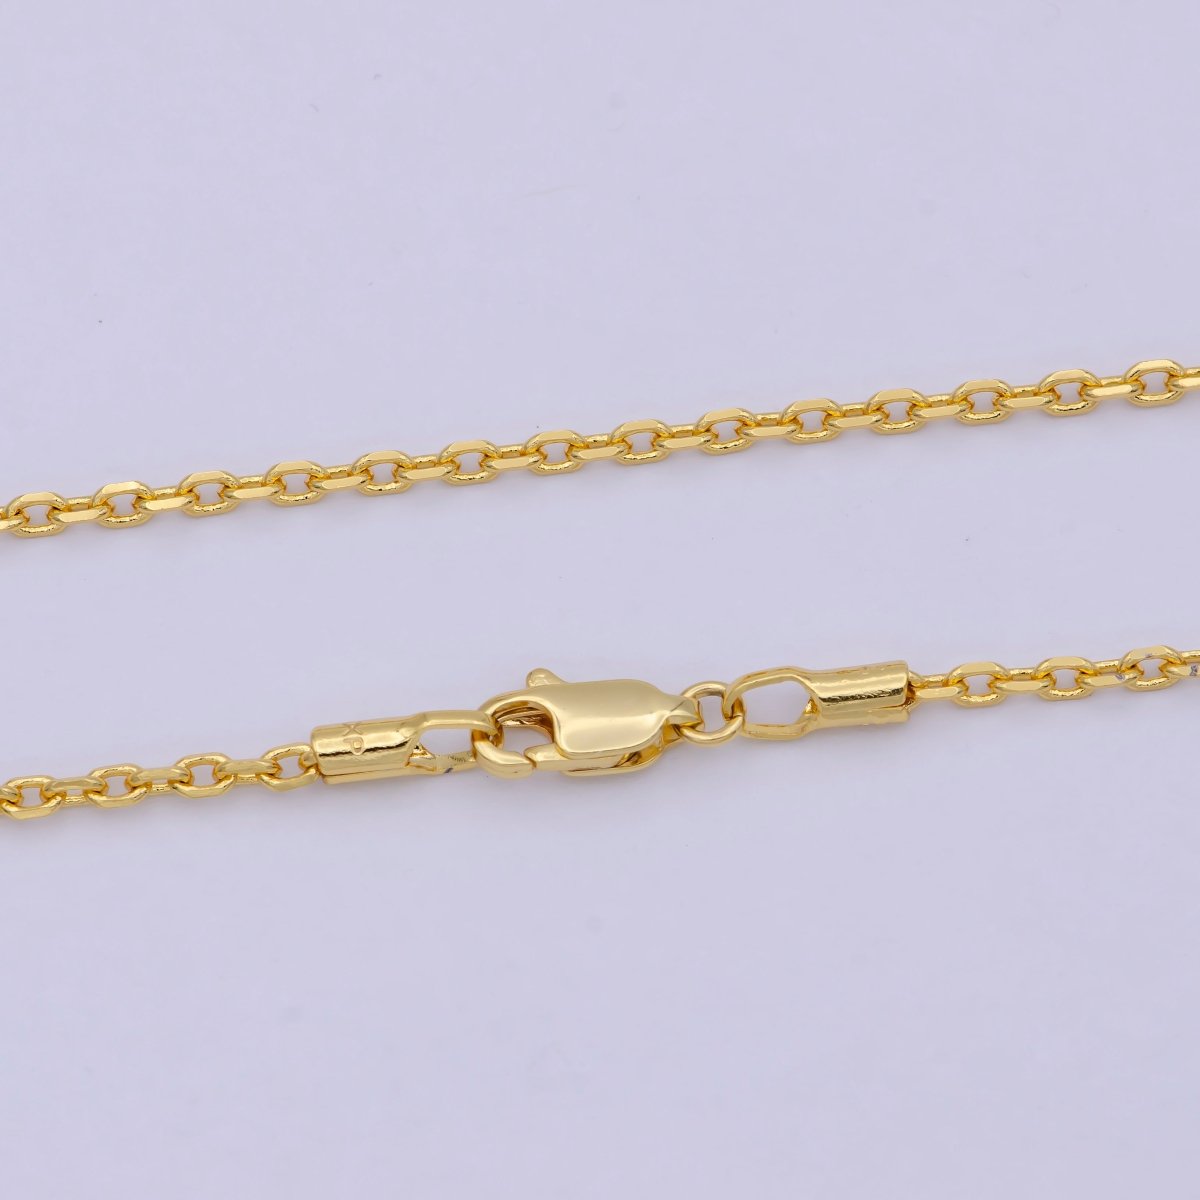 19.7'' Ready to Use 24K Gold Filled Thin Cable Necklace Chain, Layering Cable Chain Dainty Necklace, For Pendant Charm Necklace Making WA-743 - DLUXCA